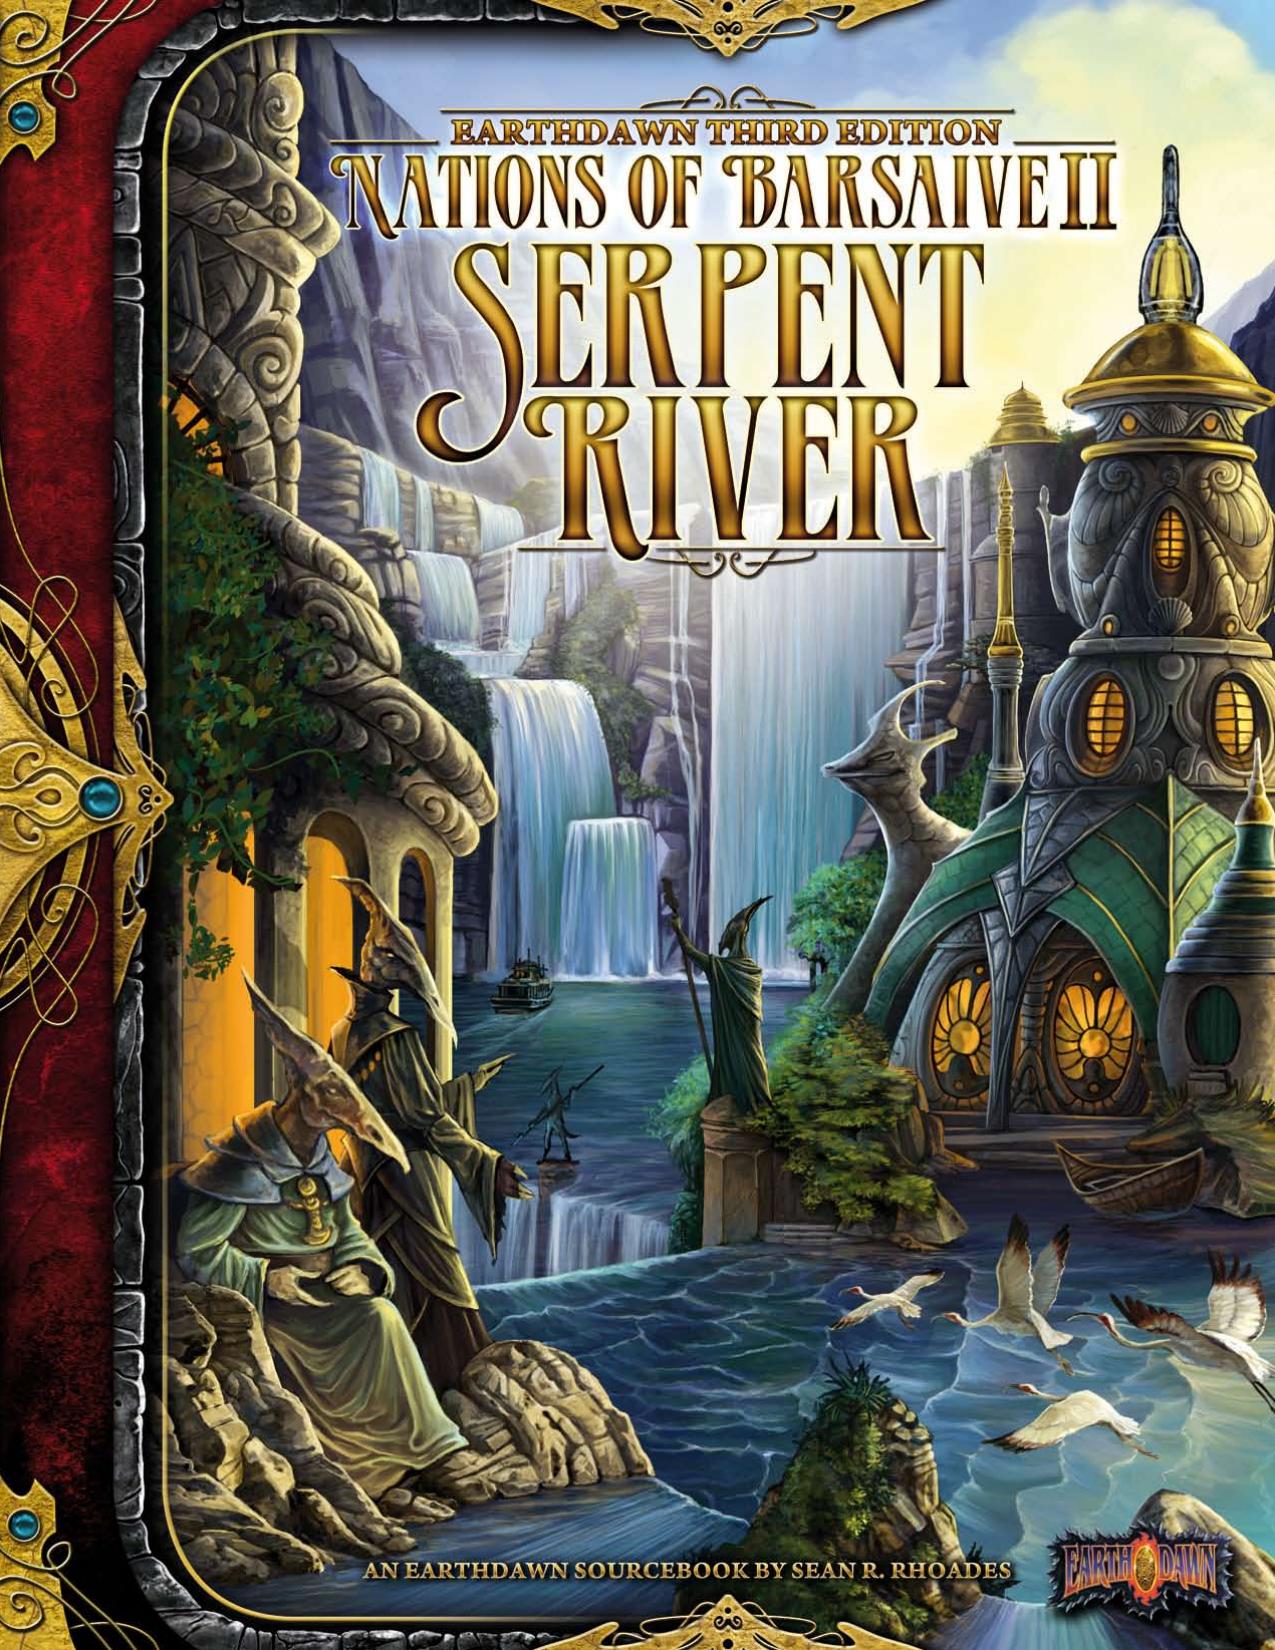 Nations of Barsaive Volume Two: Serpent River